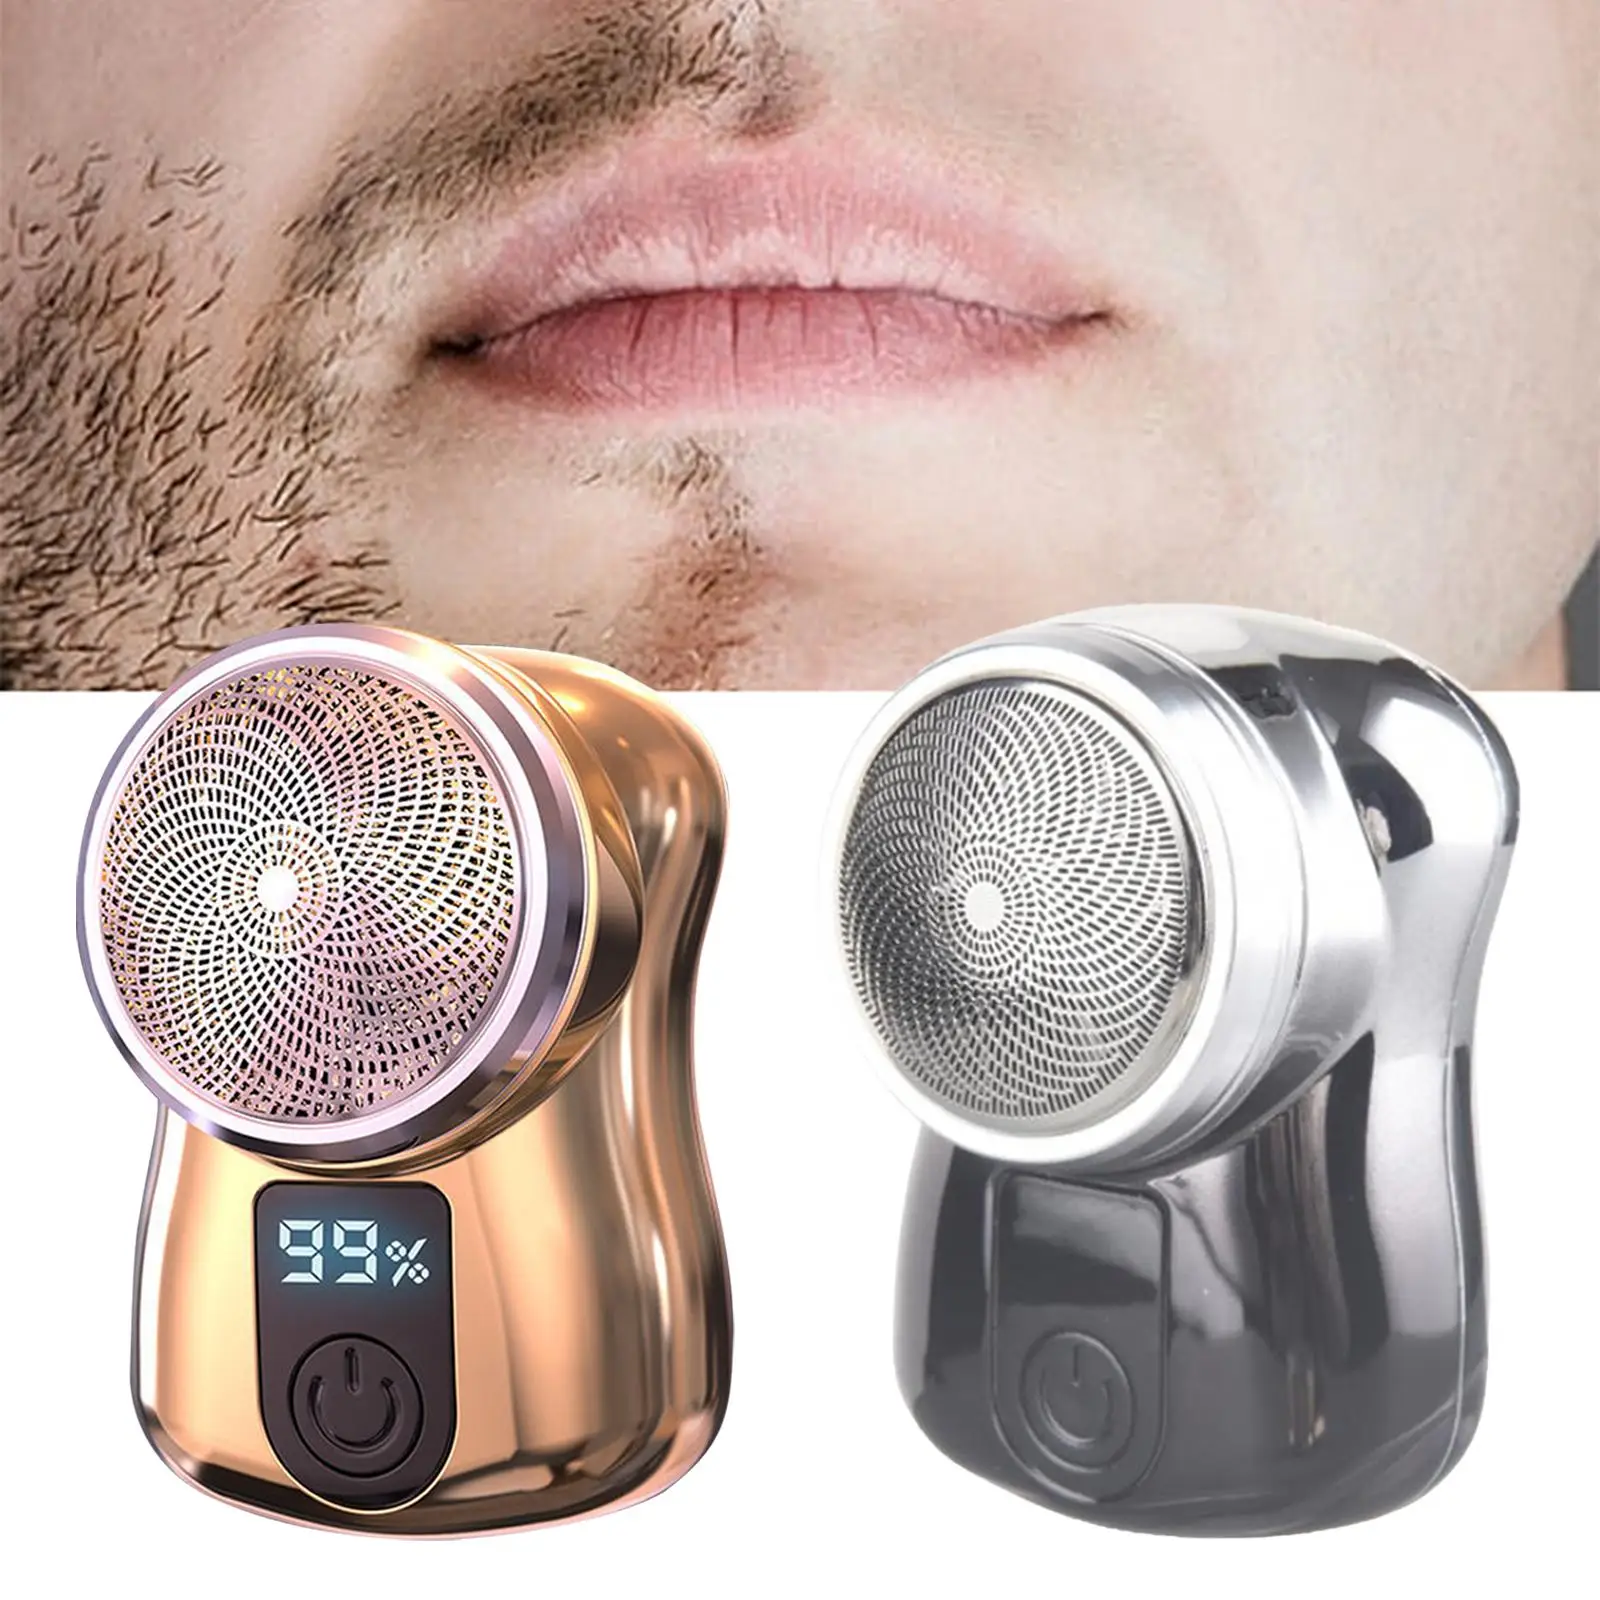 Electric Shaver Rechargeable Portable for Home Car Travel Shaving Pocket Size Cordless Electric Razor Face Hair Removal Trimmer